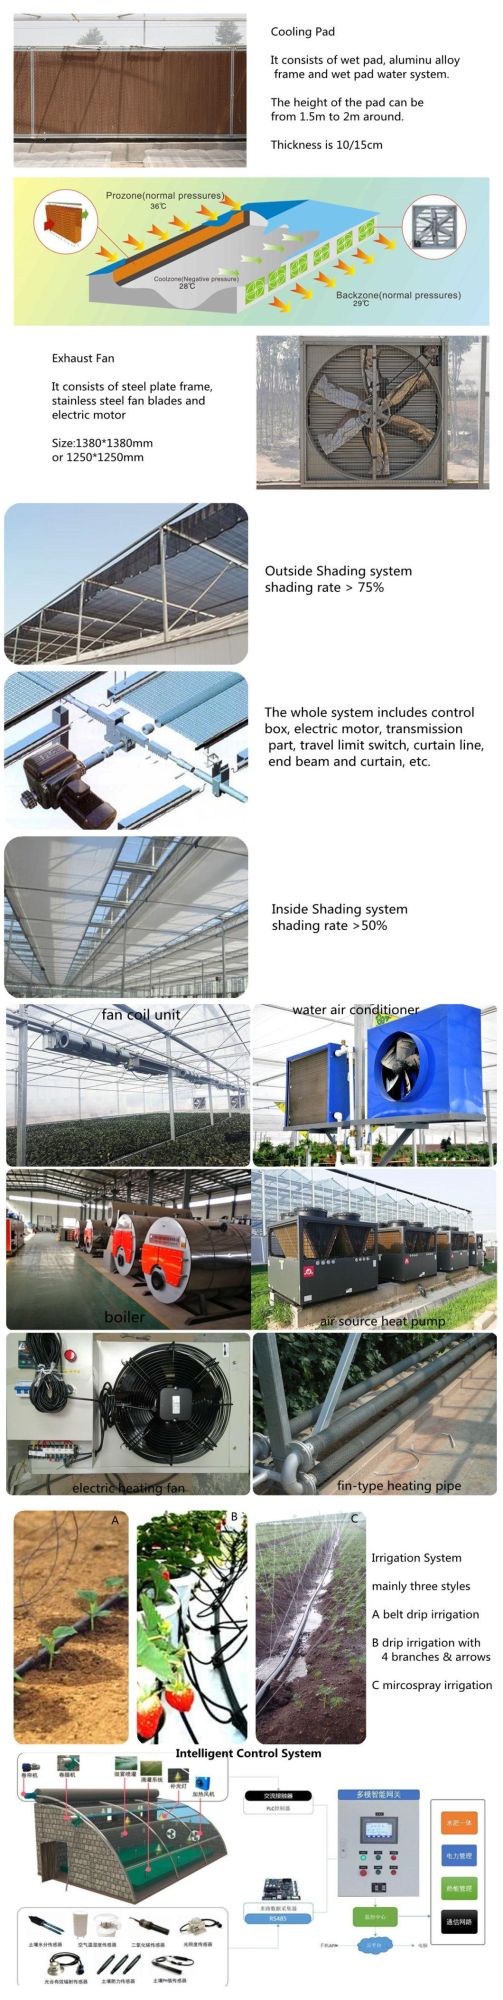 Factory Prefabricated Models of Agriculture Seedling Machines with Watering Station and Air Compressor for Complete Sowing Handling for Farming